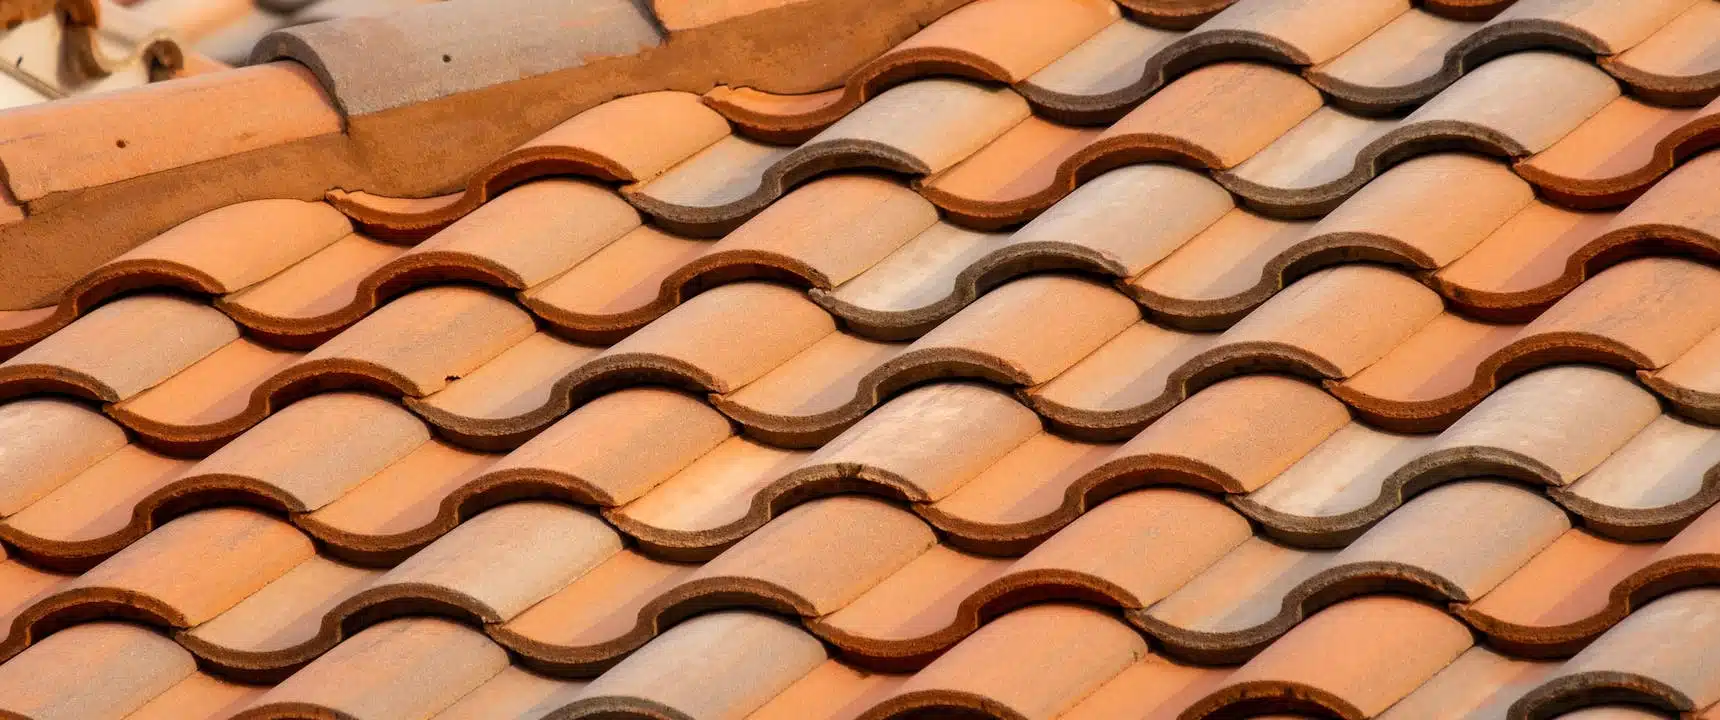 roofing materials clay and concrete tiles